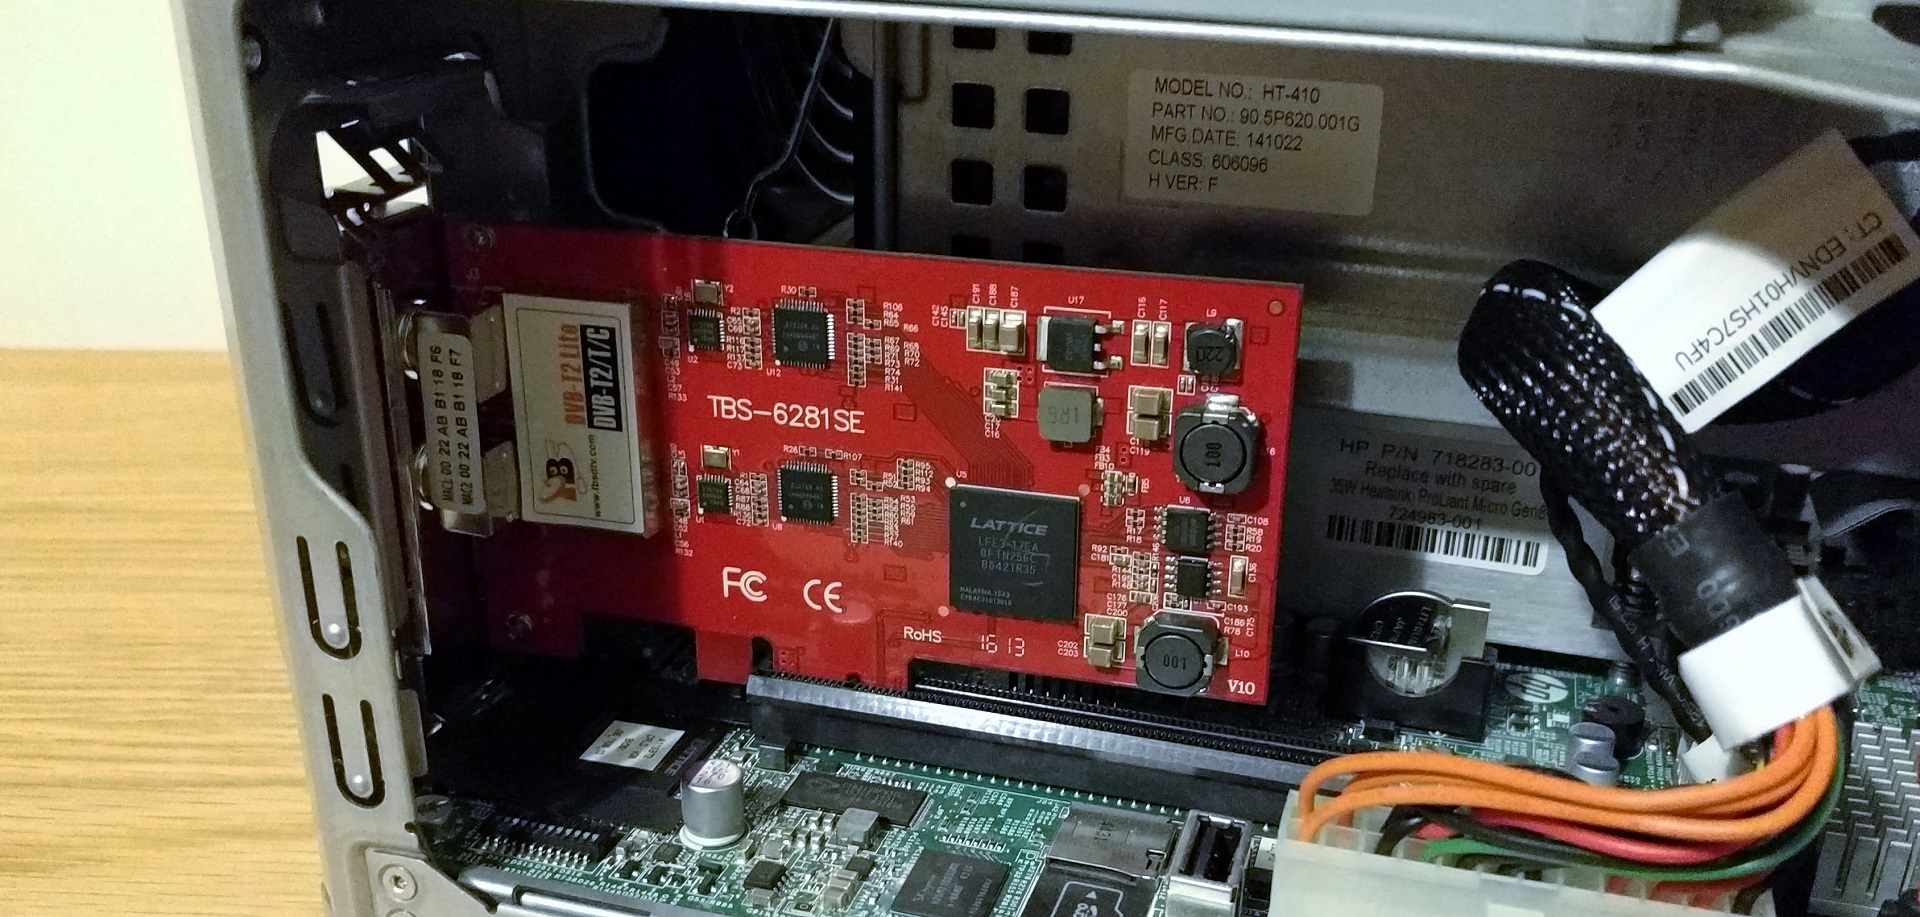 Internal view of installed card